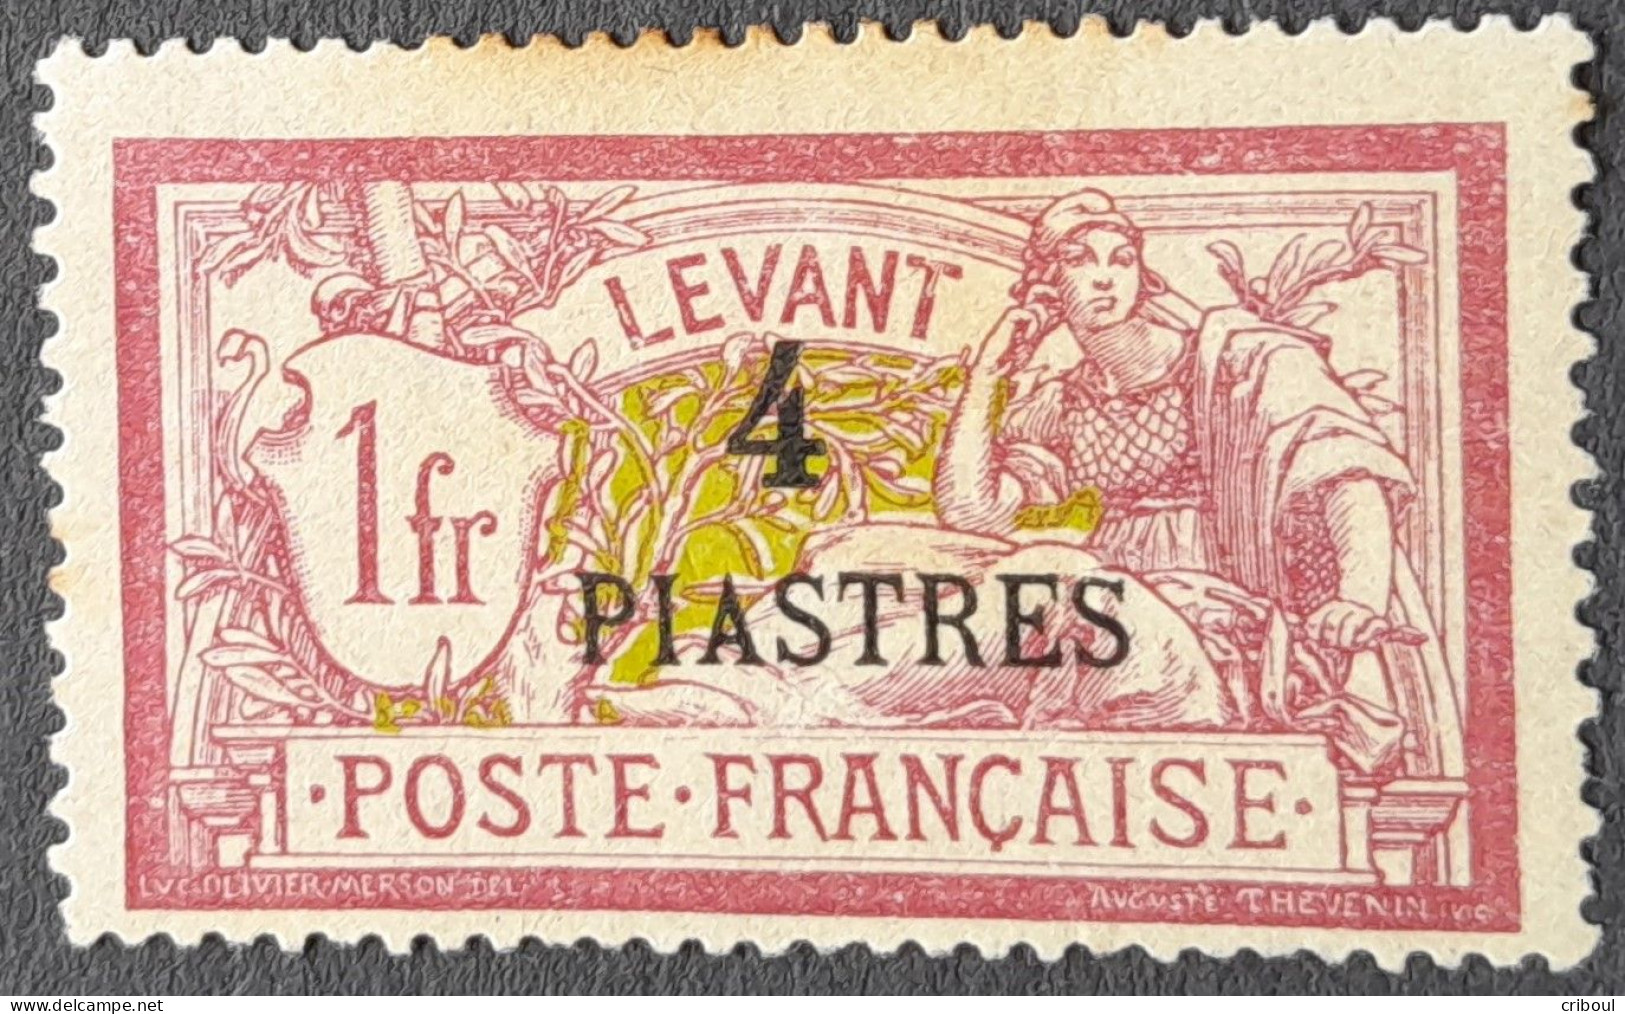 Levant 1902 Type Merson De France Surchargé Overprinted 4 PIASTRES Yvert 21 (*) MNG - Unused Stamps